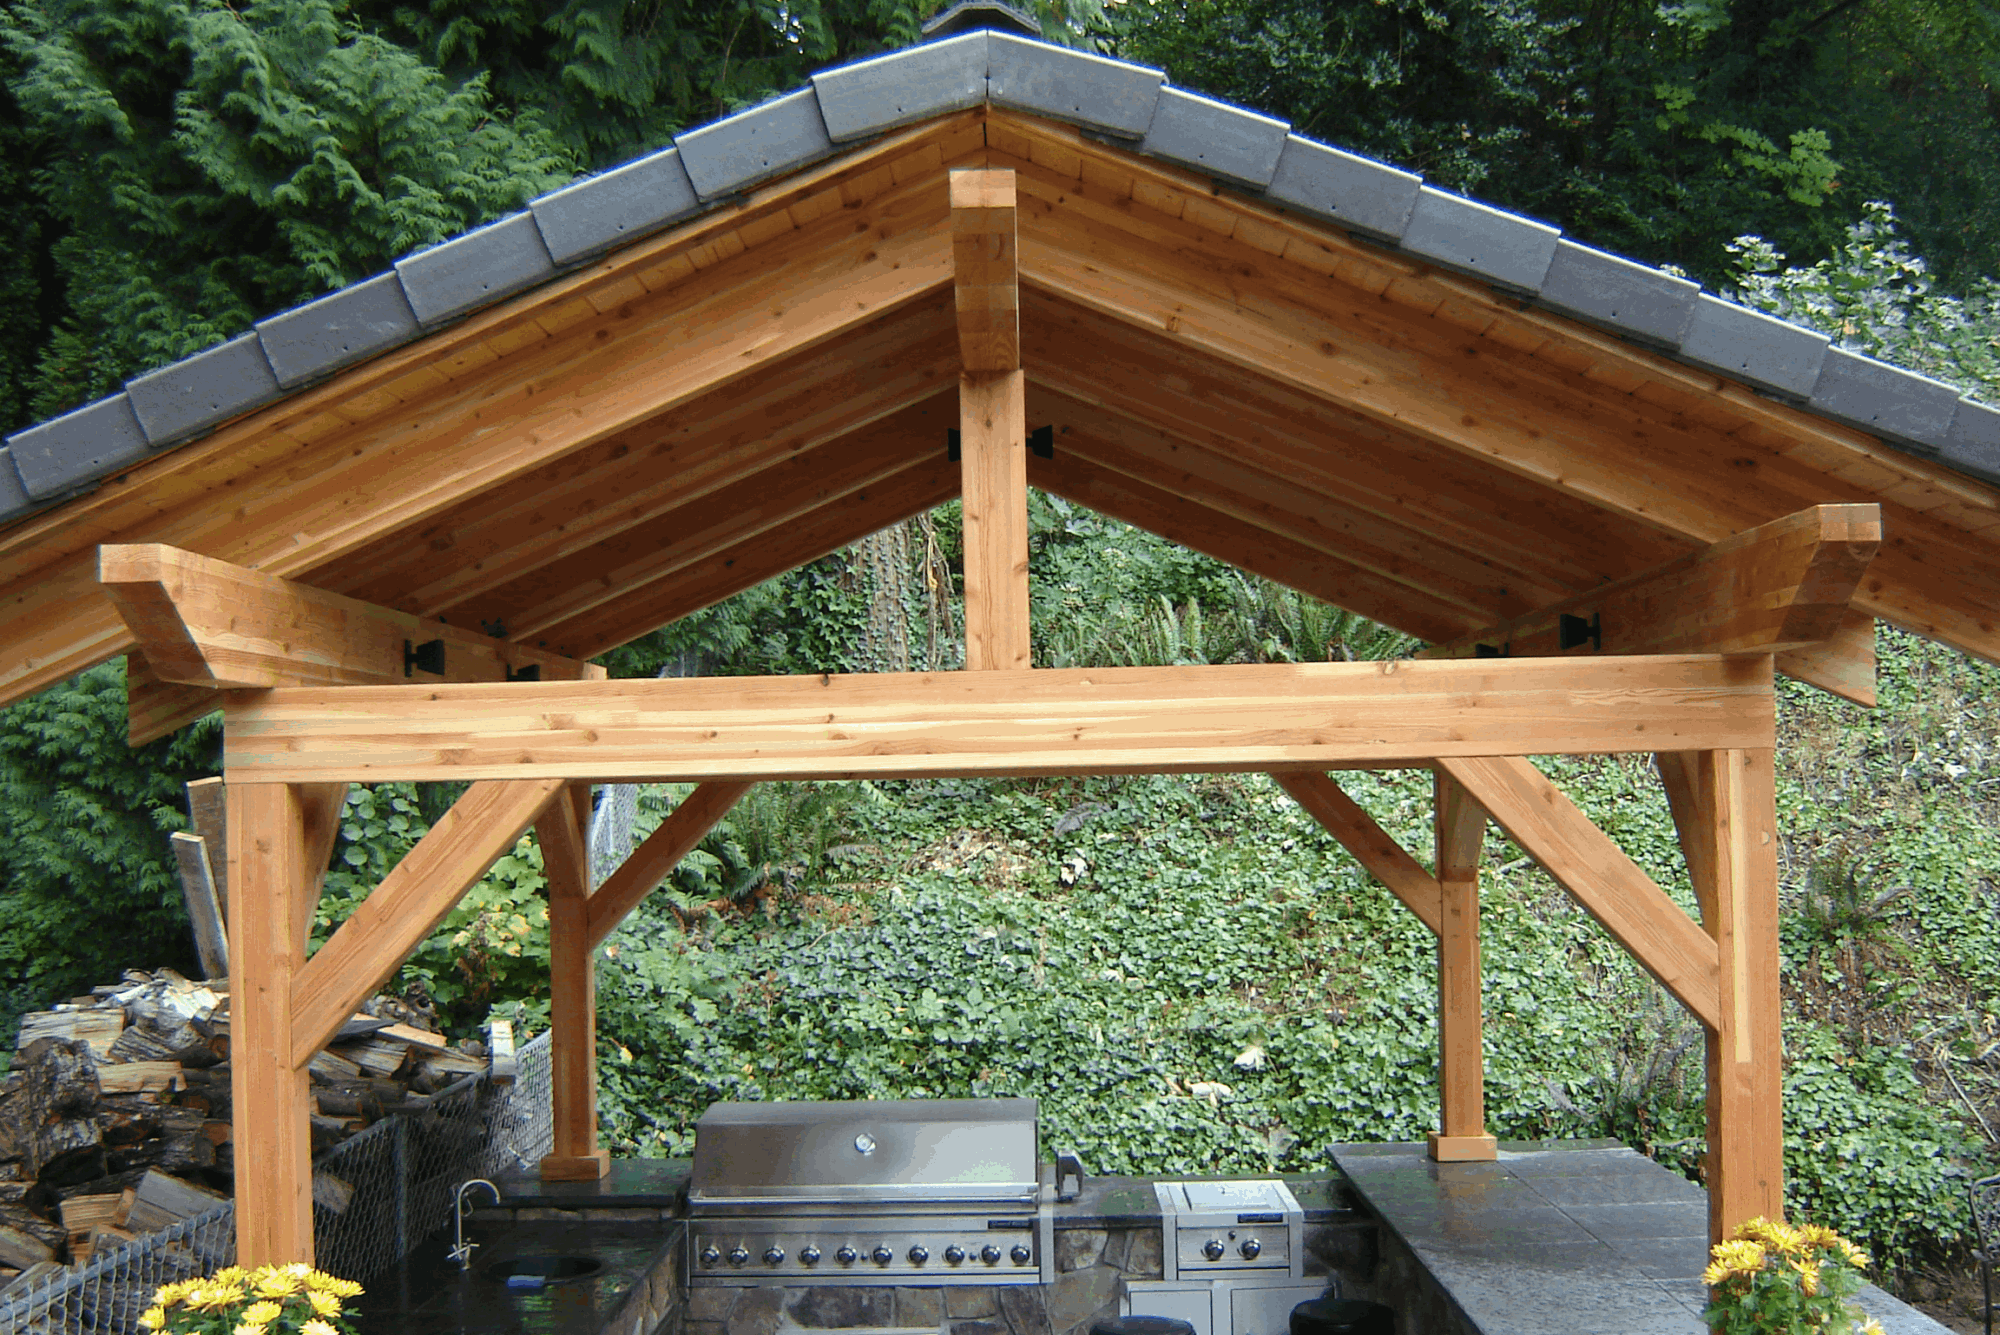 Shelters from sun and rain enhance the outdoor experience.